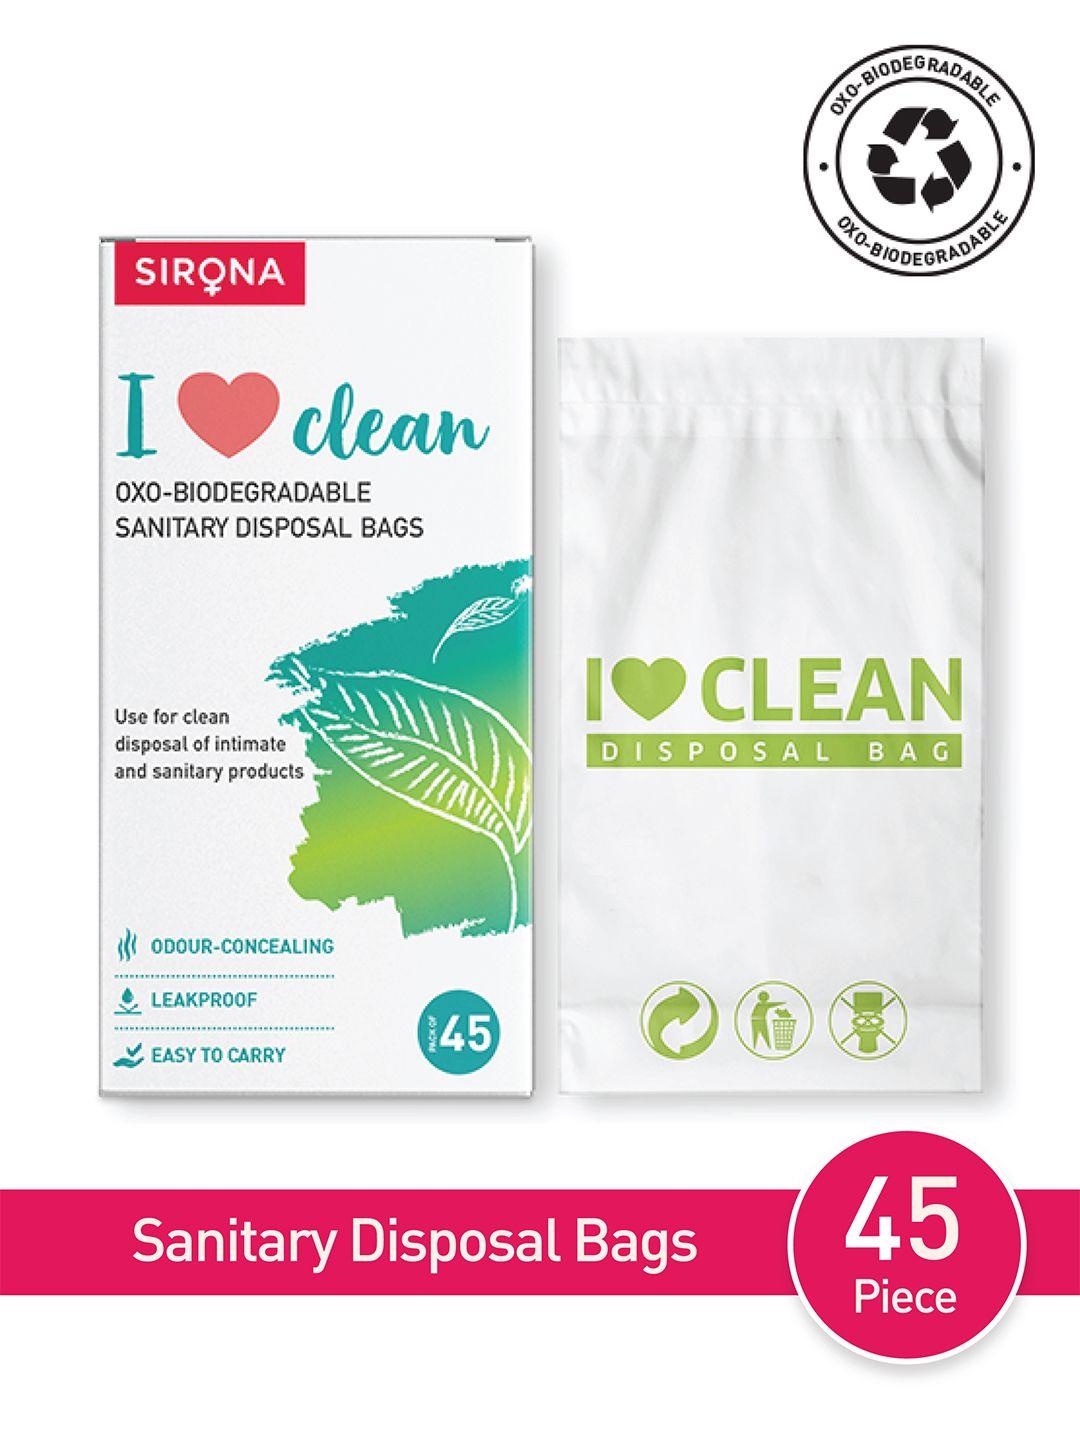 sirona pack of 45 sanitary and diapers disposal bags